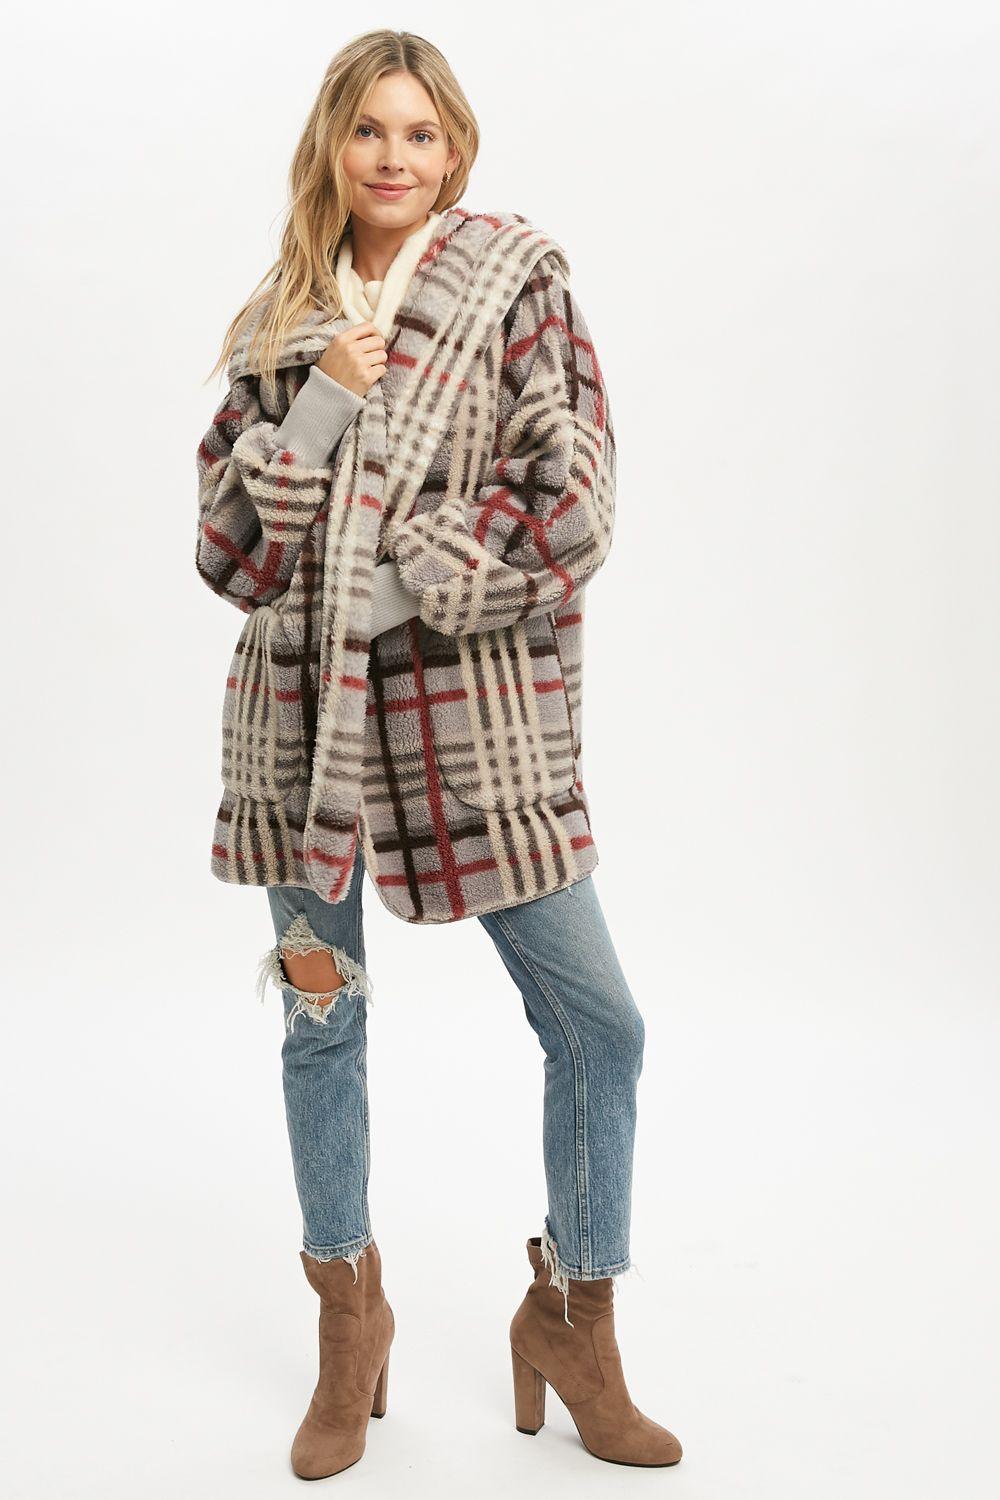 Grey Checkered Oversized Fur Hoodie/Sherpa - Strawberry Moon Boutique